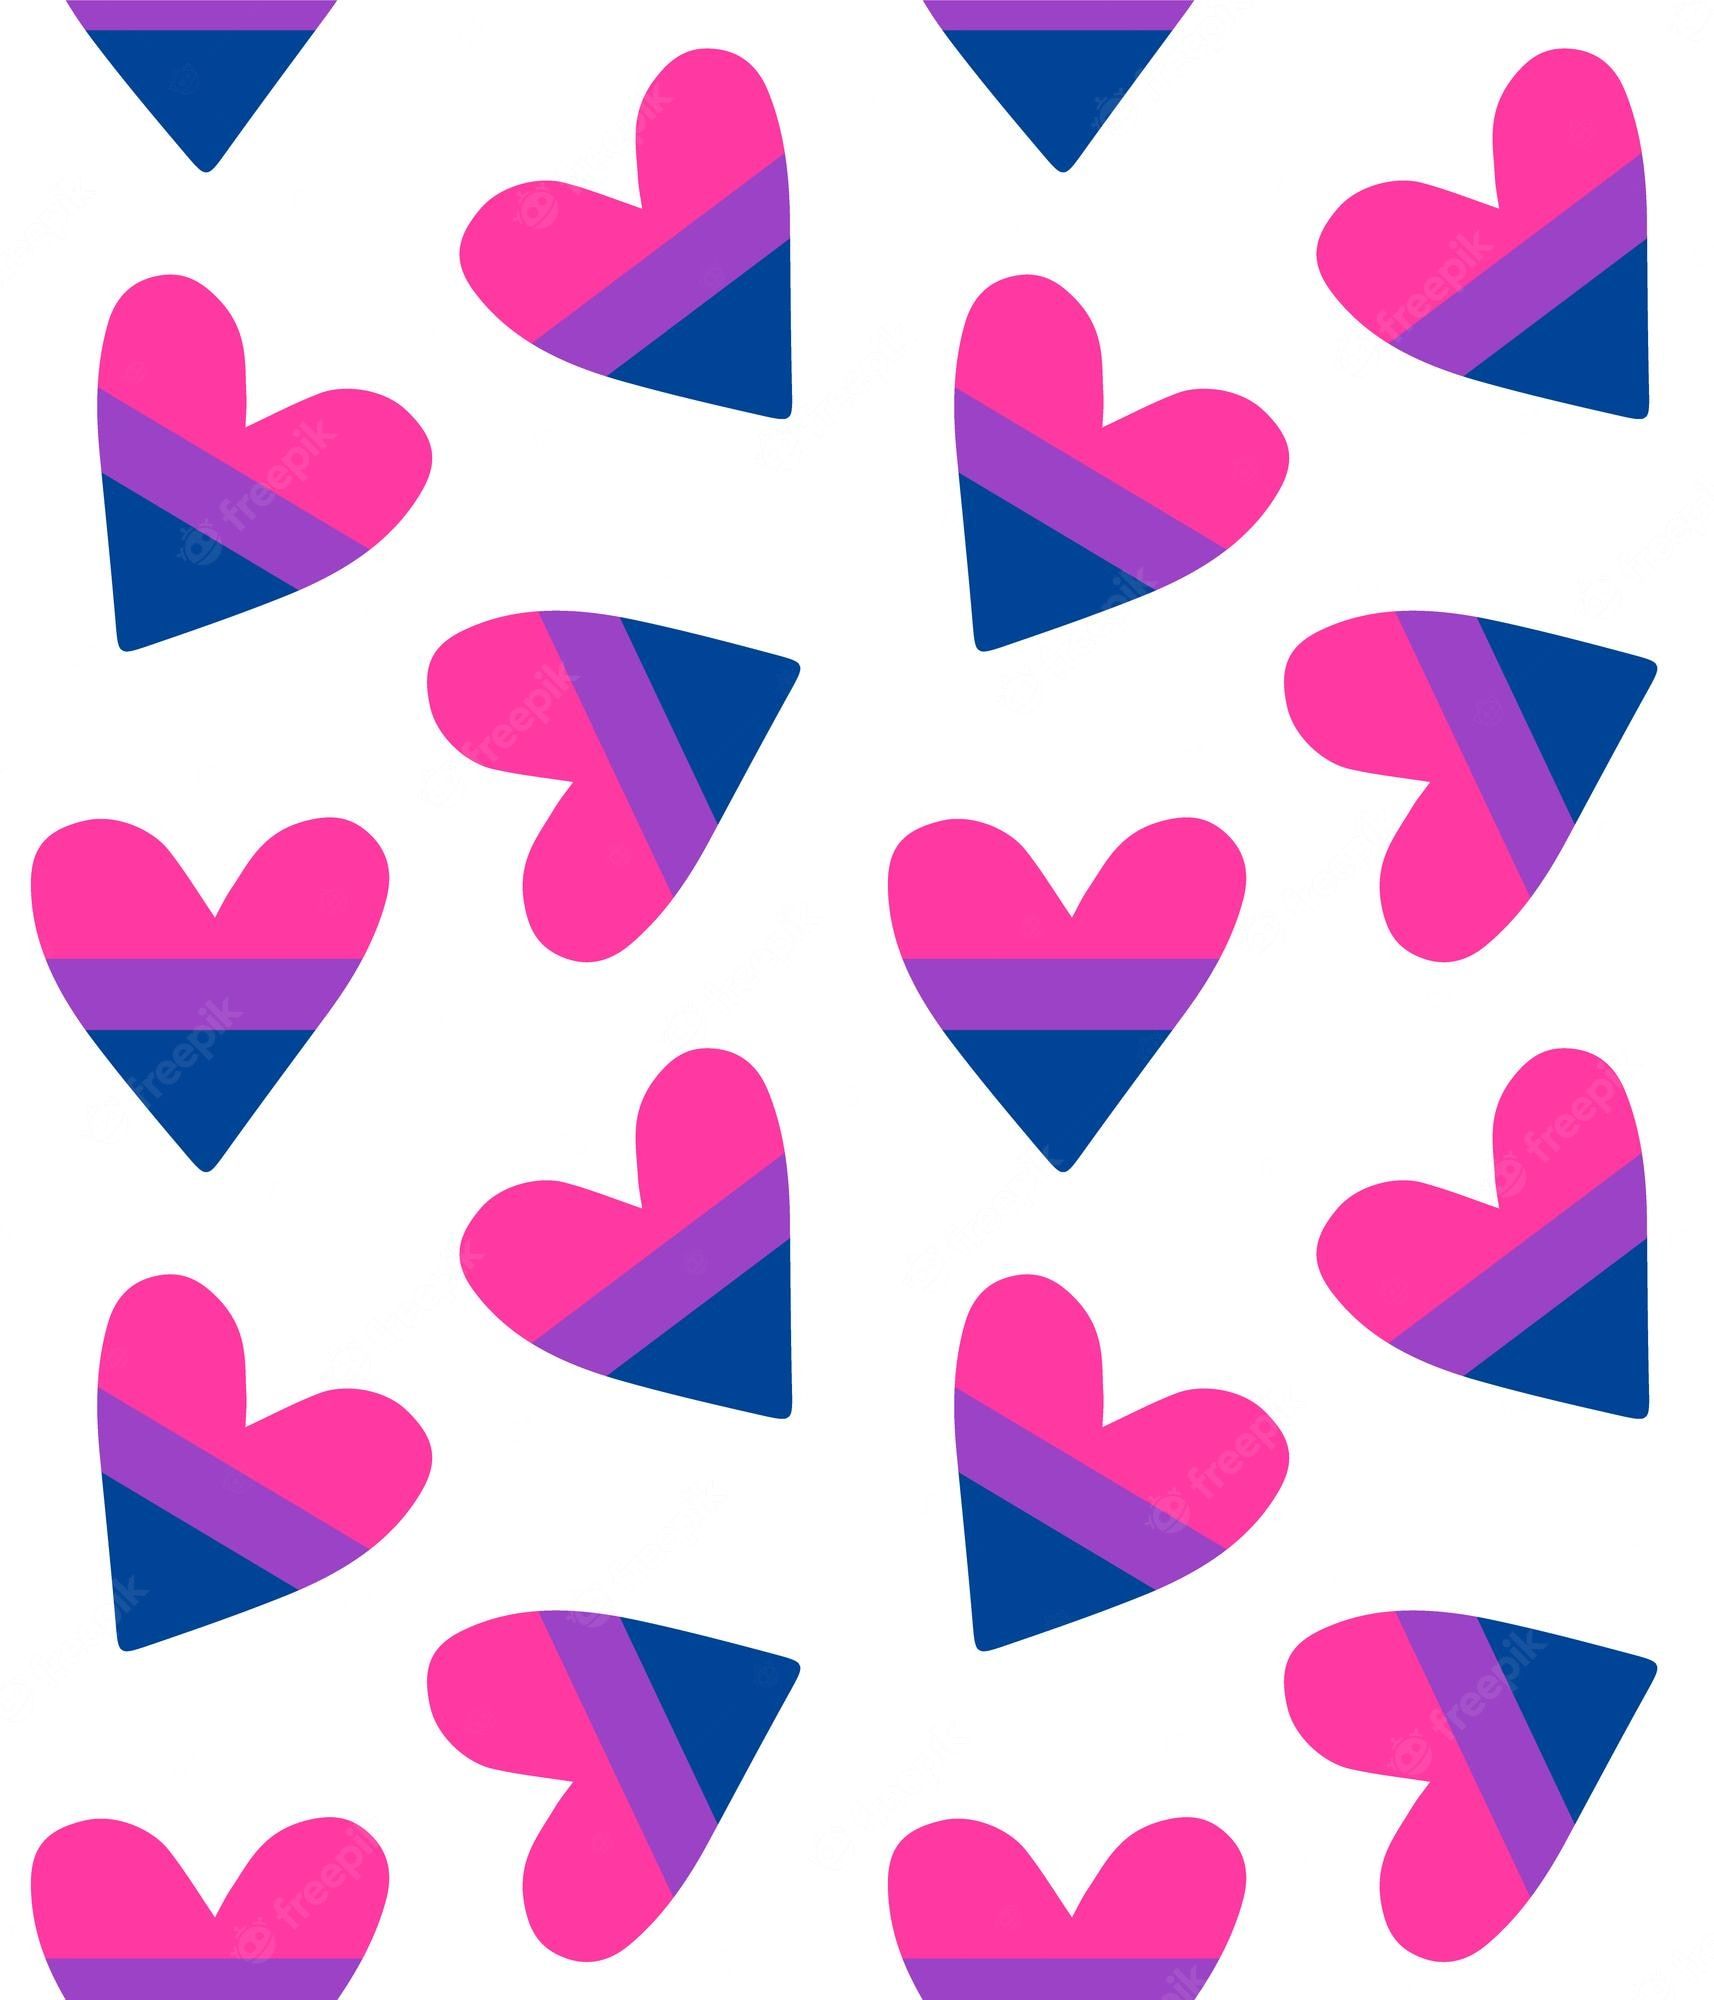 A pattern of pink and blue hearts - Bisexual